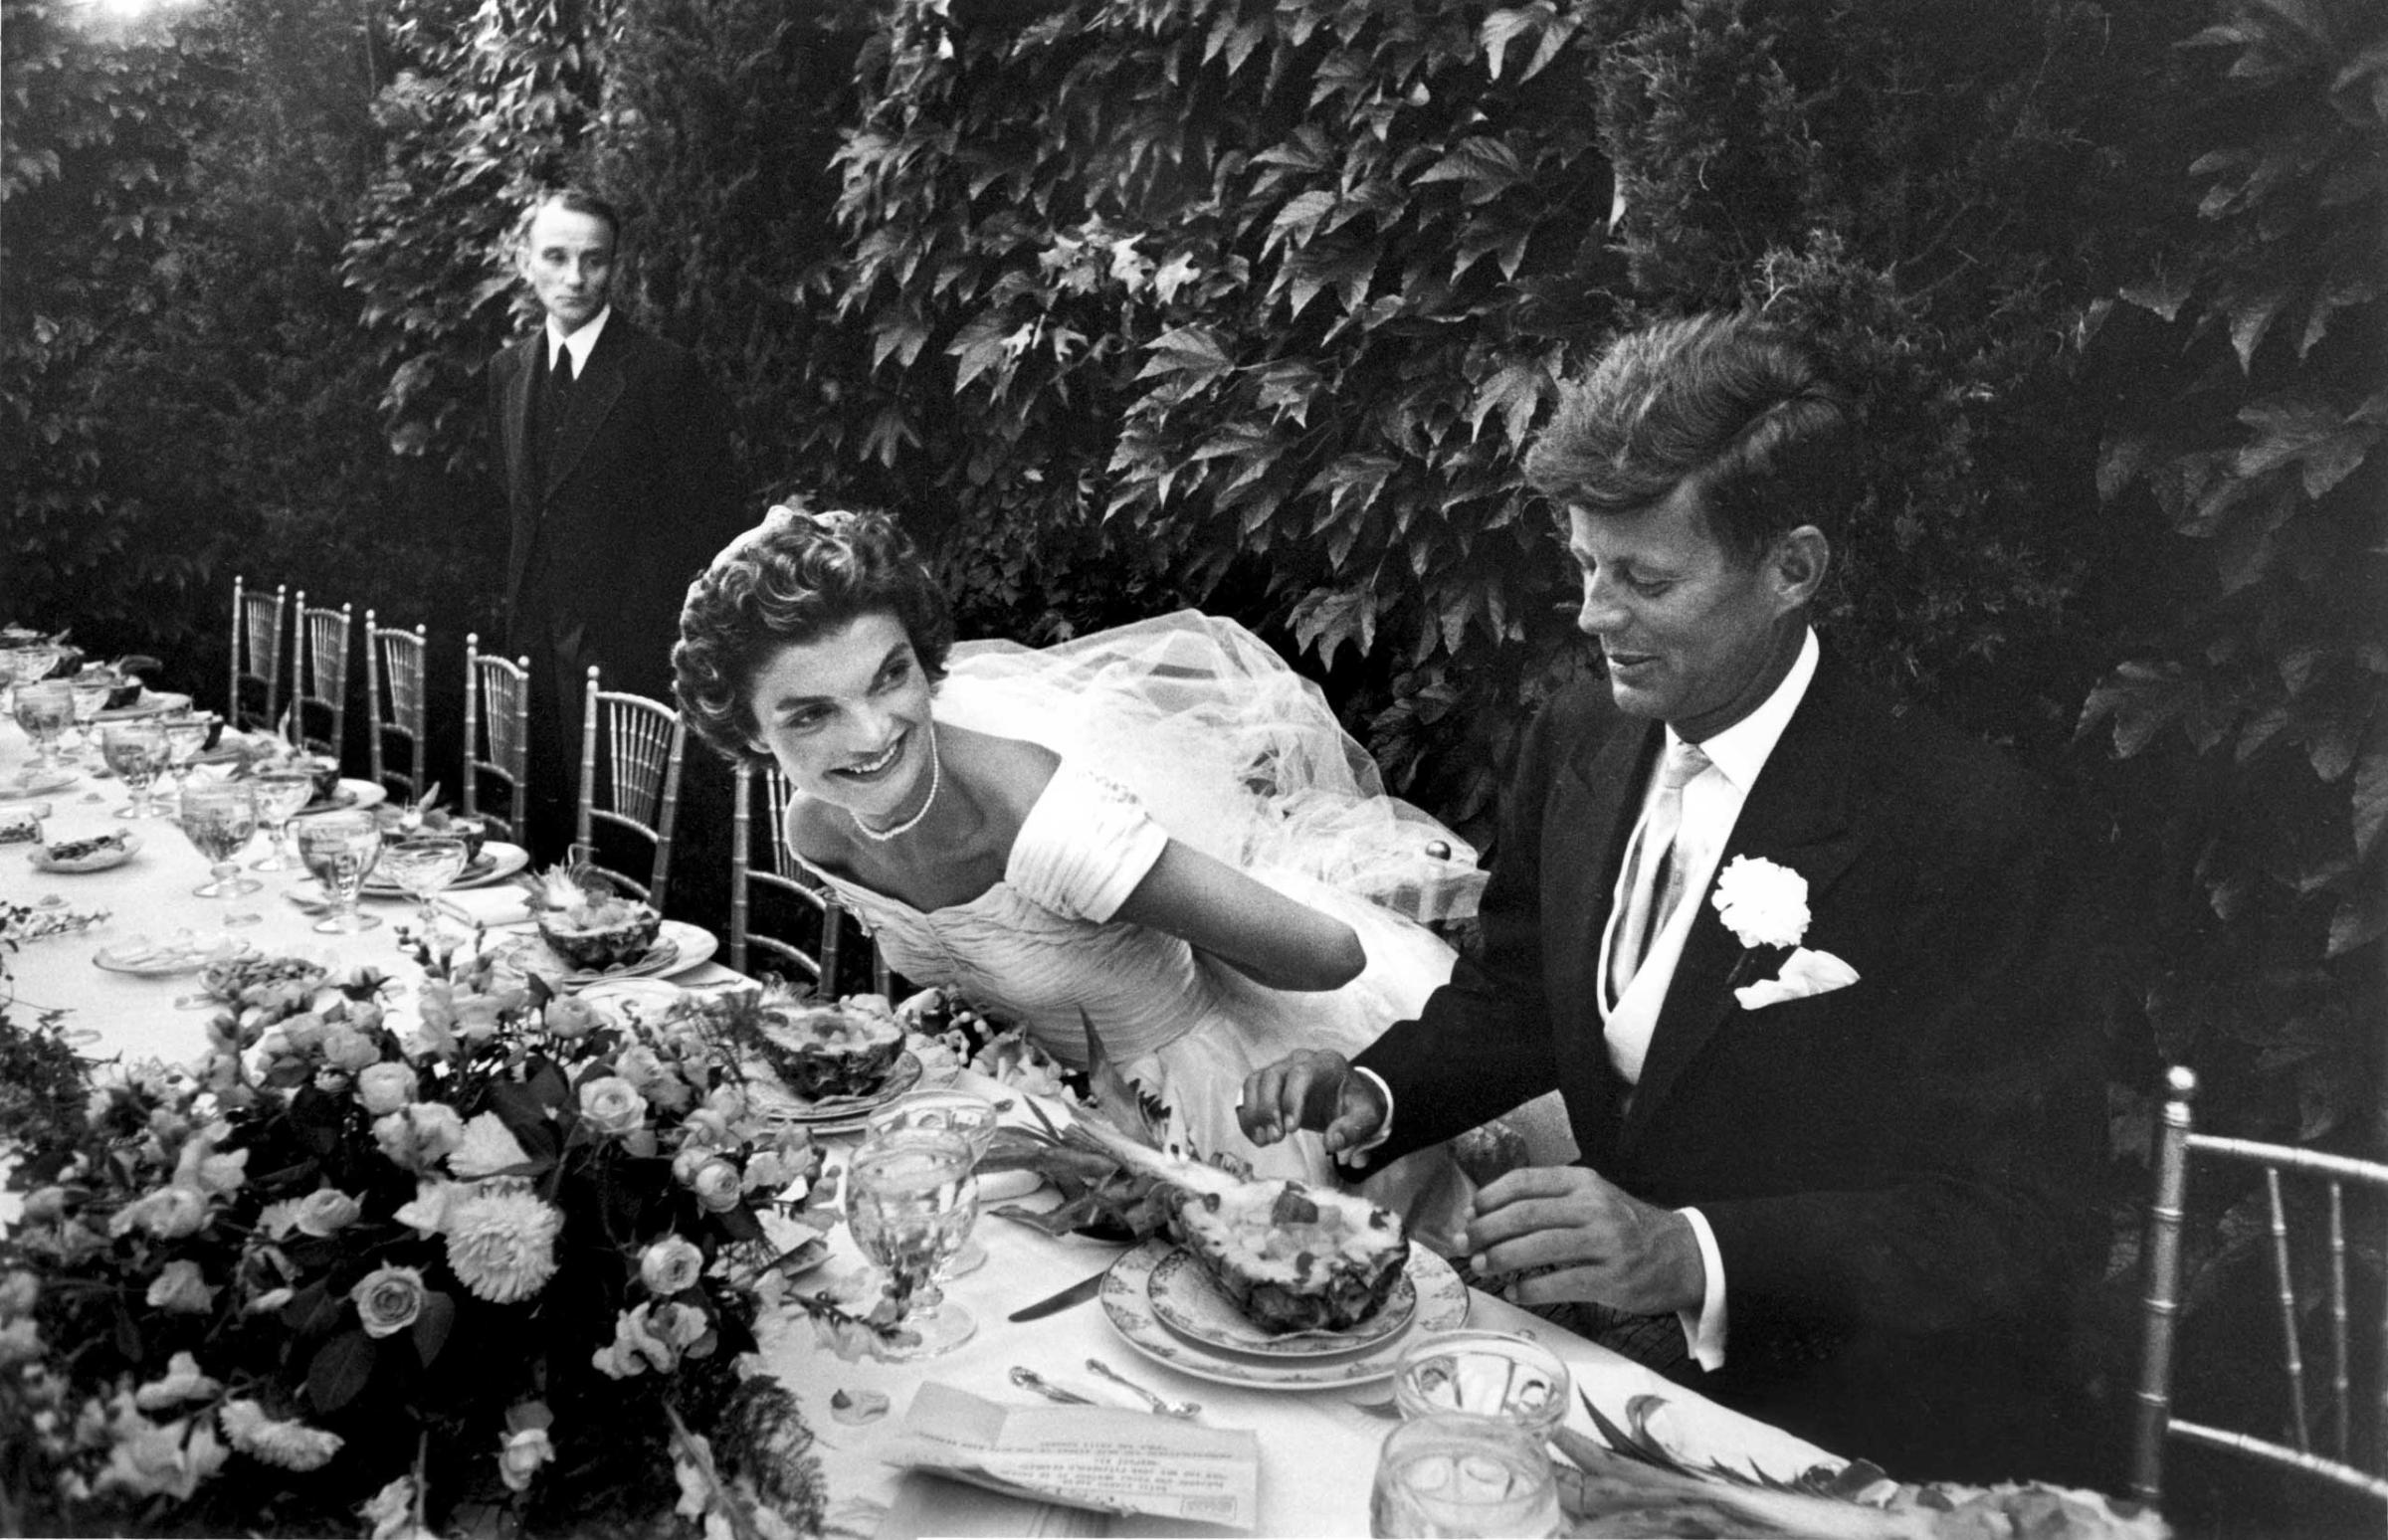 Senator John Kennedy and his bride, Jacqueline Bouvier Kennedy, smile during their wedding reception, September 12, 1953, in Newport, Rhode Island. Originally published in the September 26, 1953, issue of LIFE.